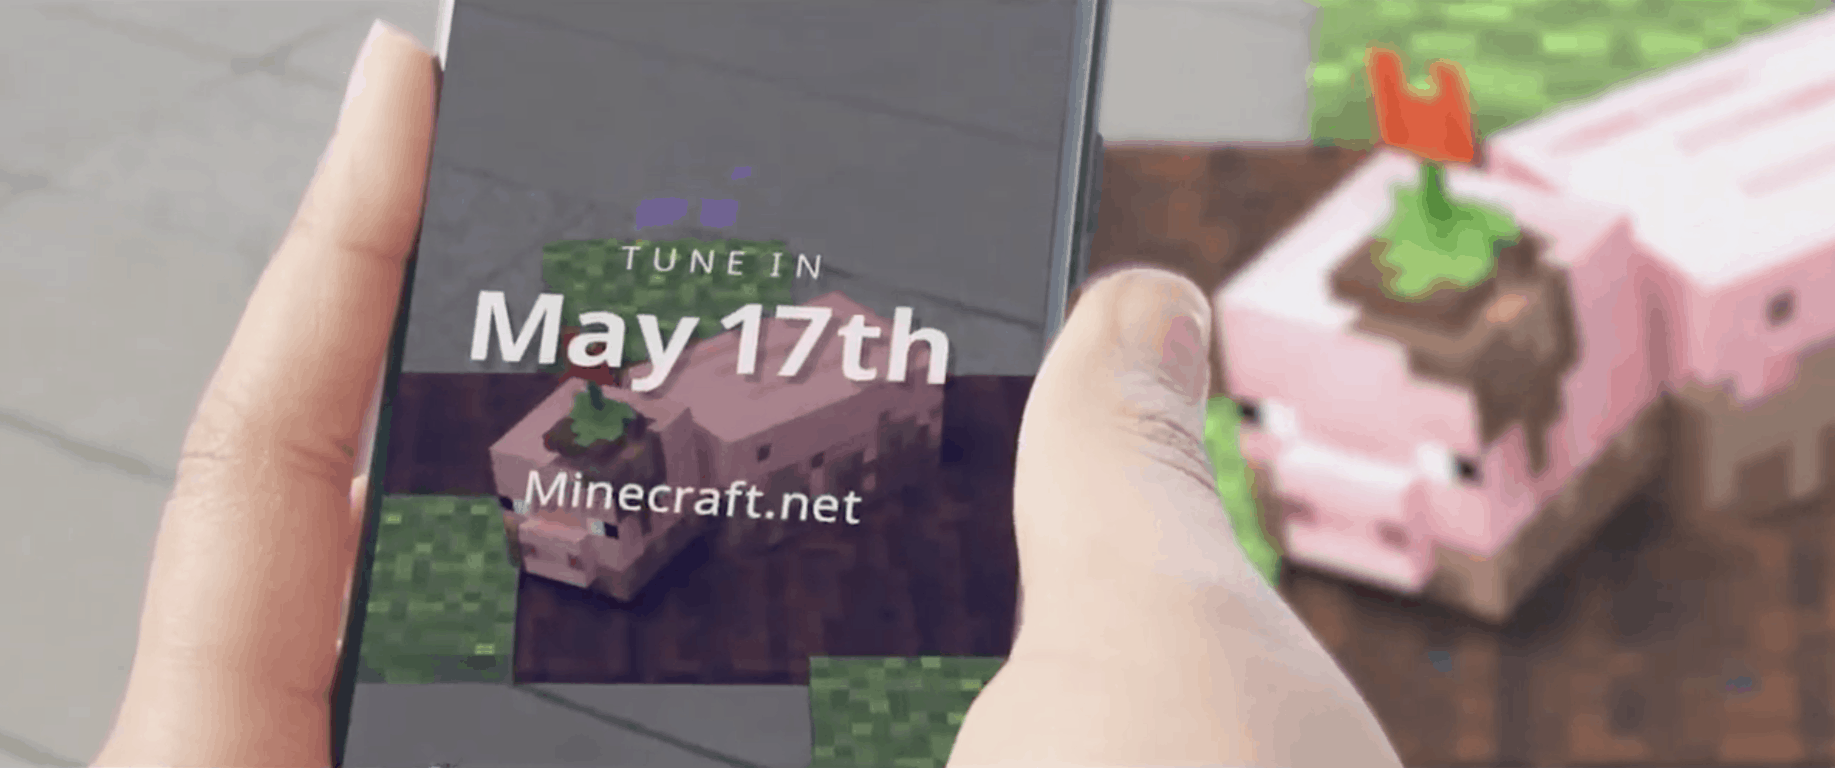 Build 2019: microsoft teases new minecraft augmented reality game - onmsft. Com - may 6, 2019